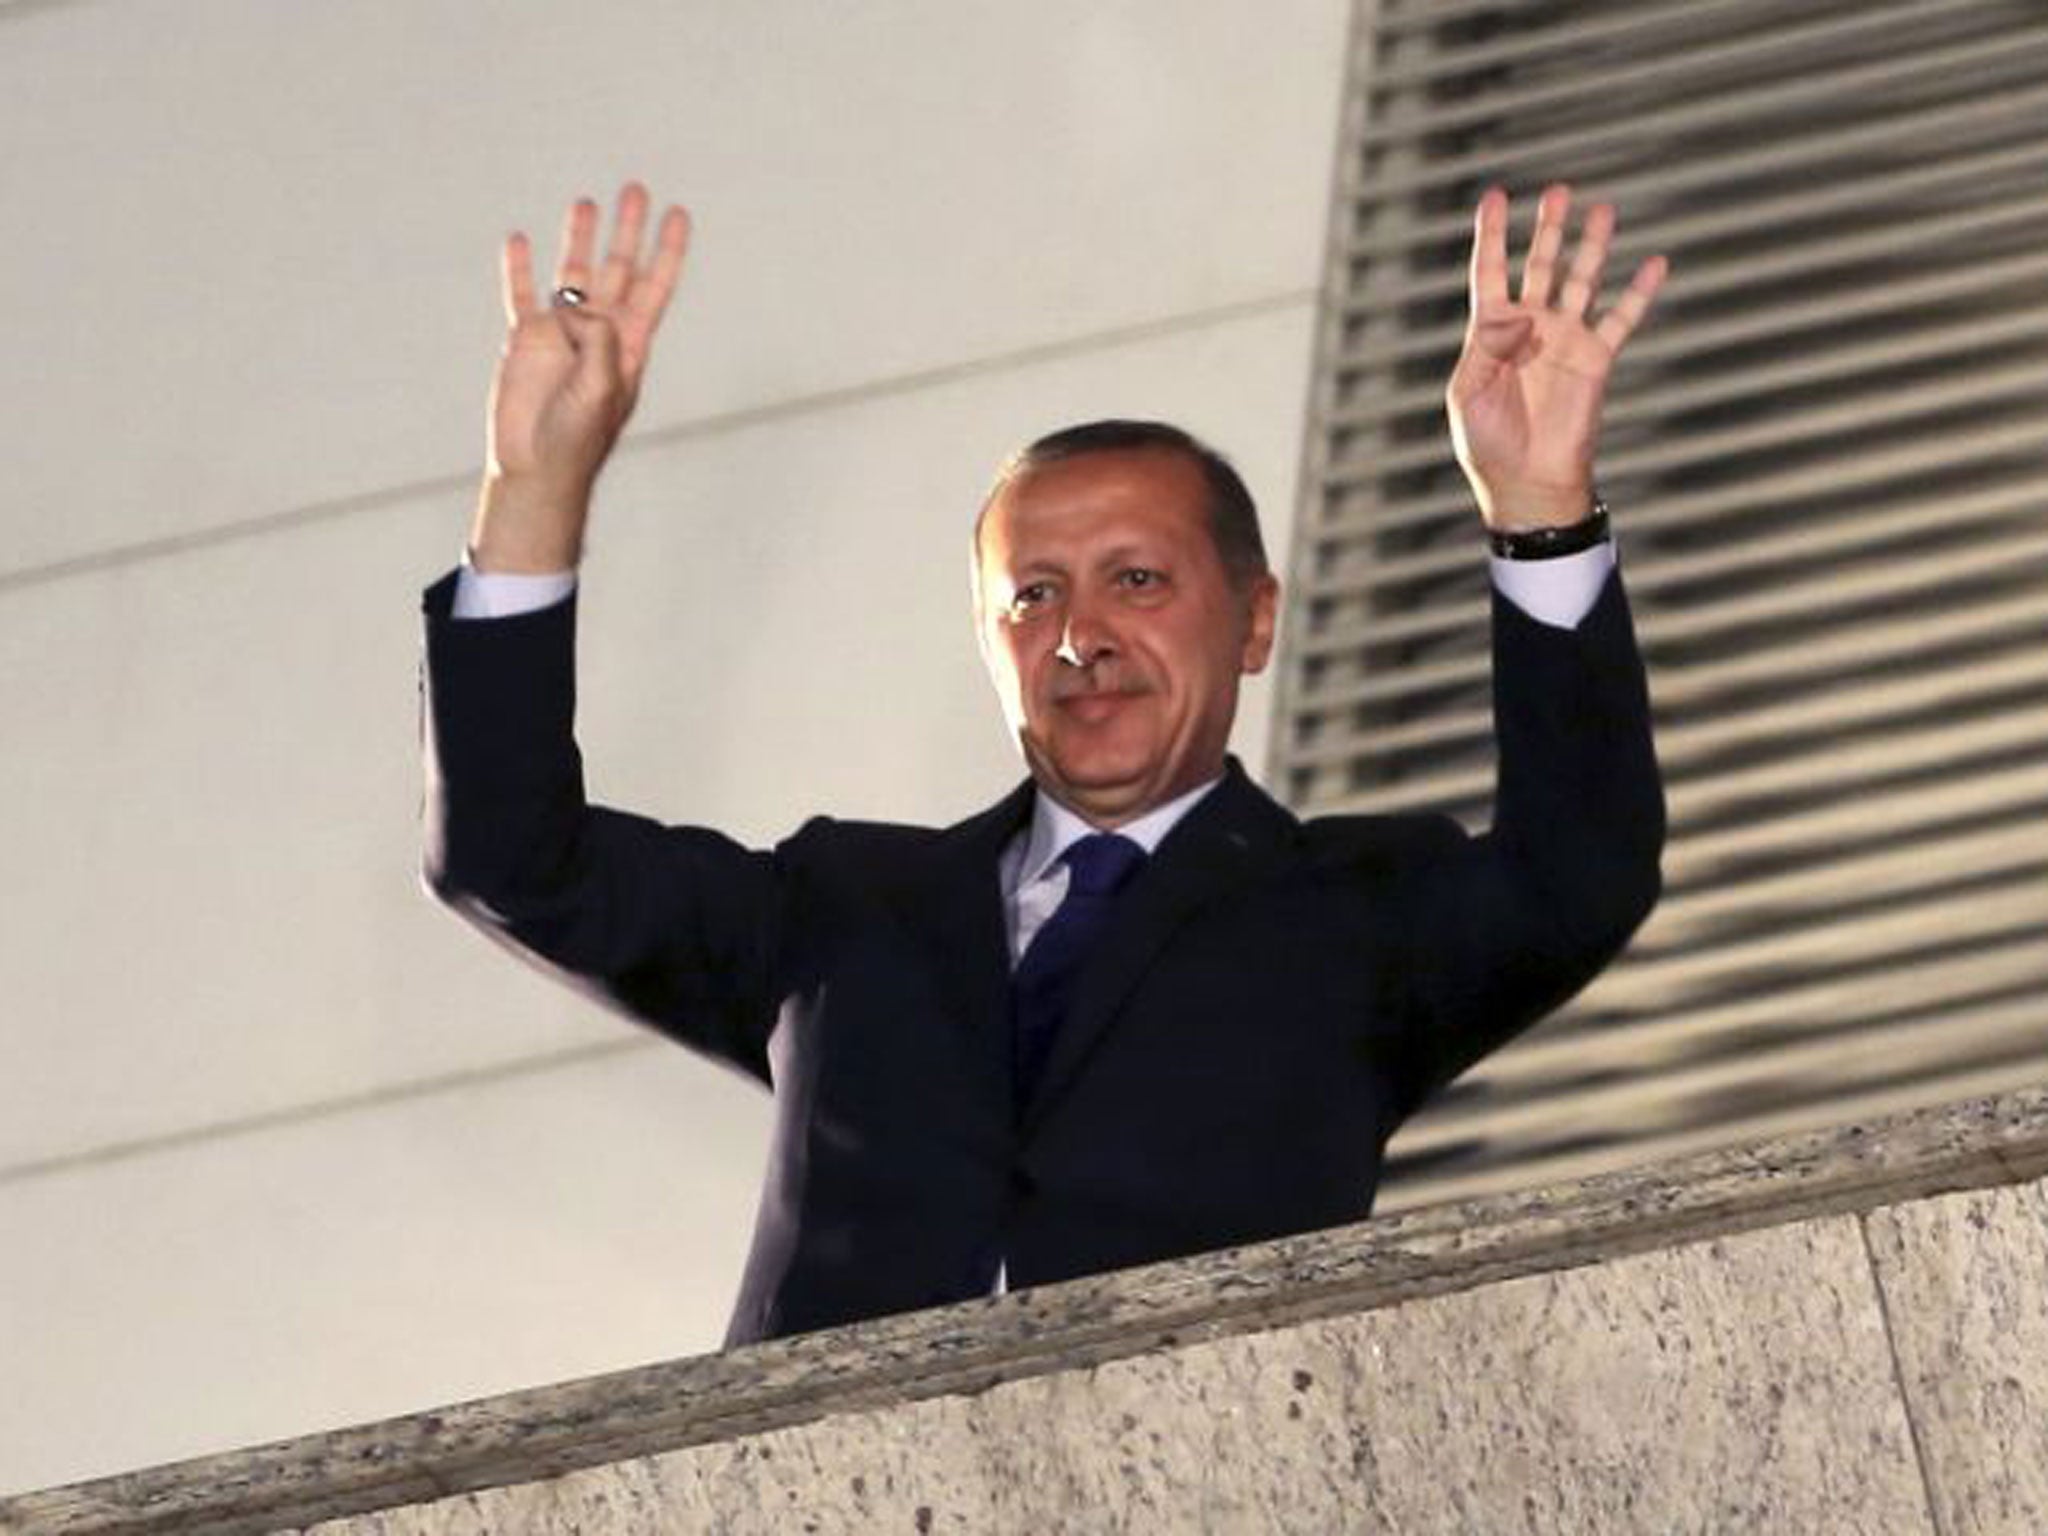 The Prime Minister, Recep Tayyip Erdogan, has spoken out against abortion